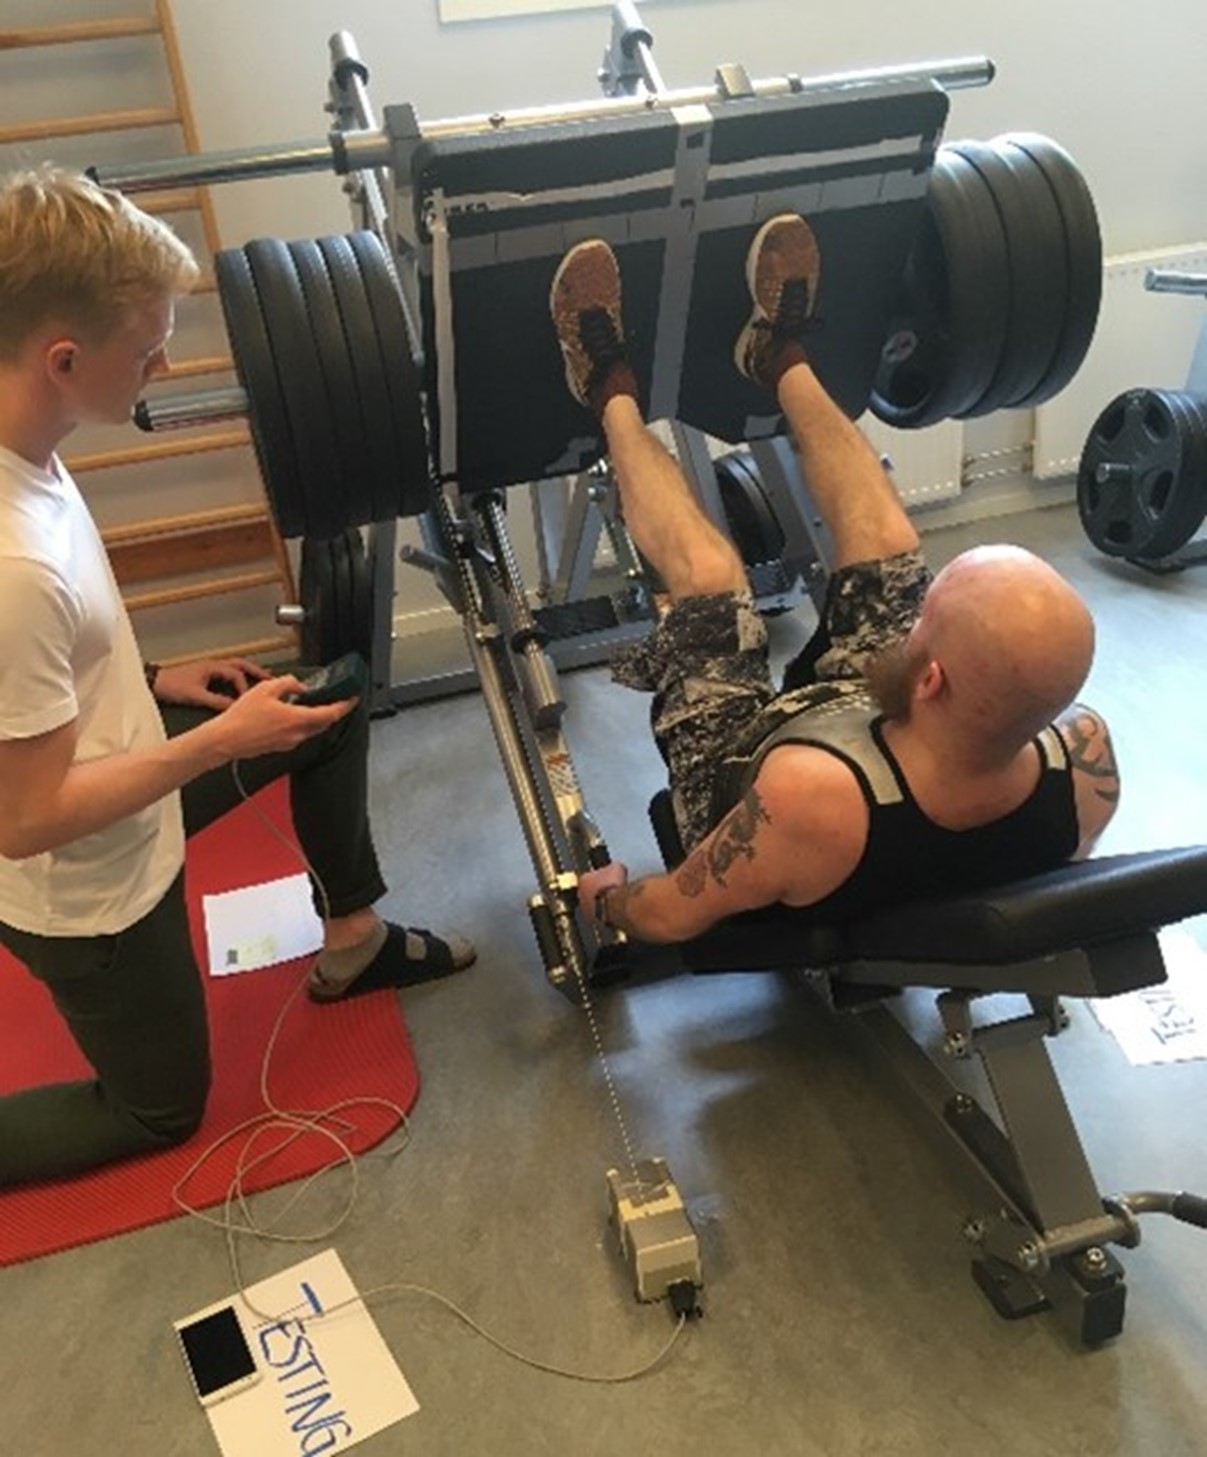 Measuring lower extremity force-generating capacity (strength and power) in the leg press apparatus. 